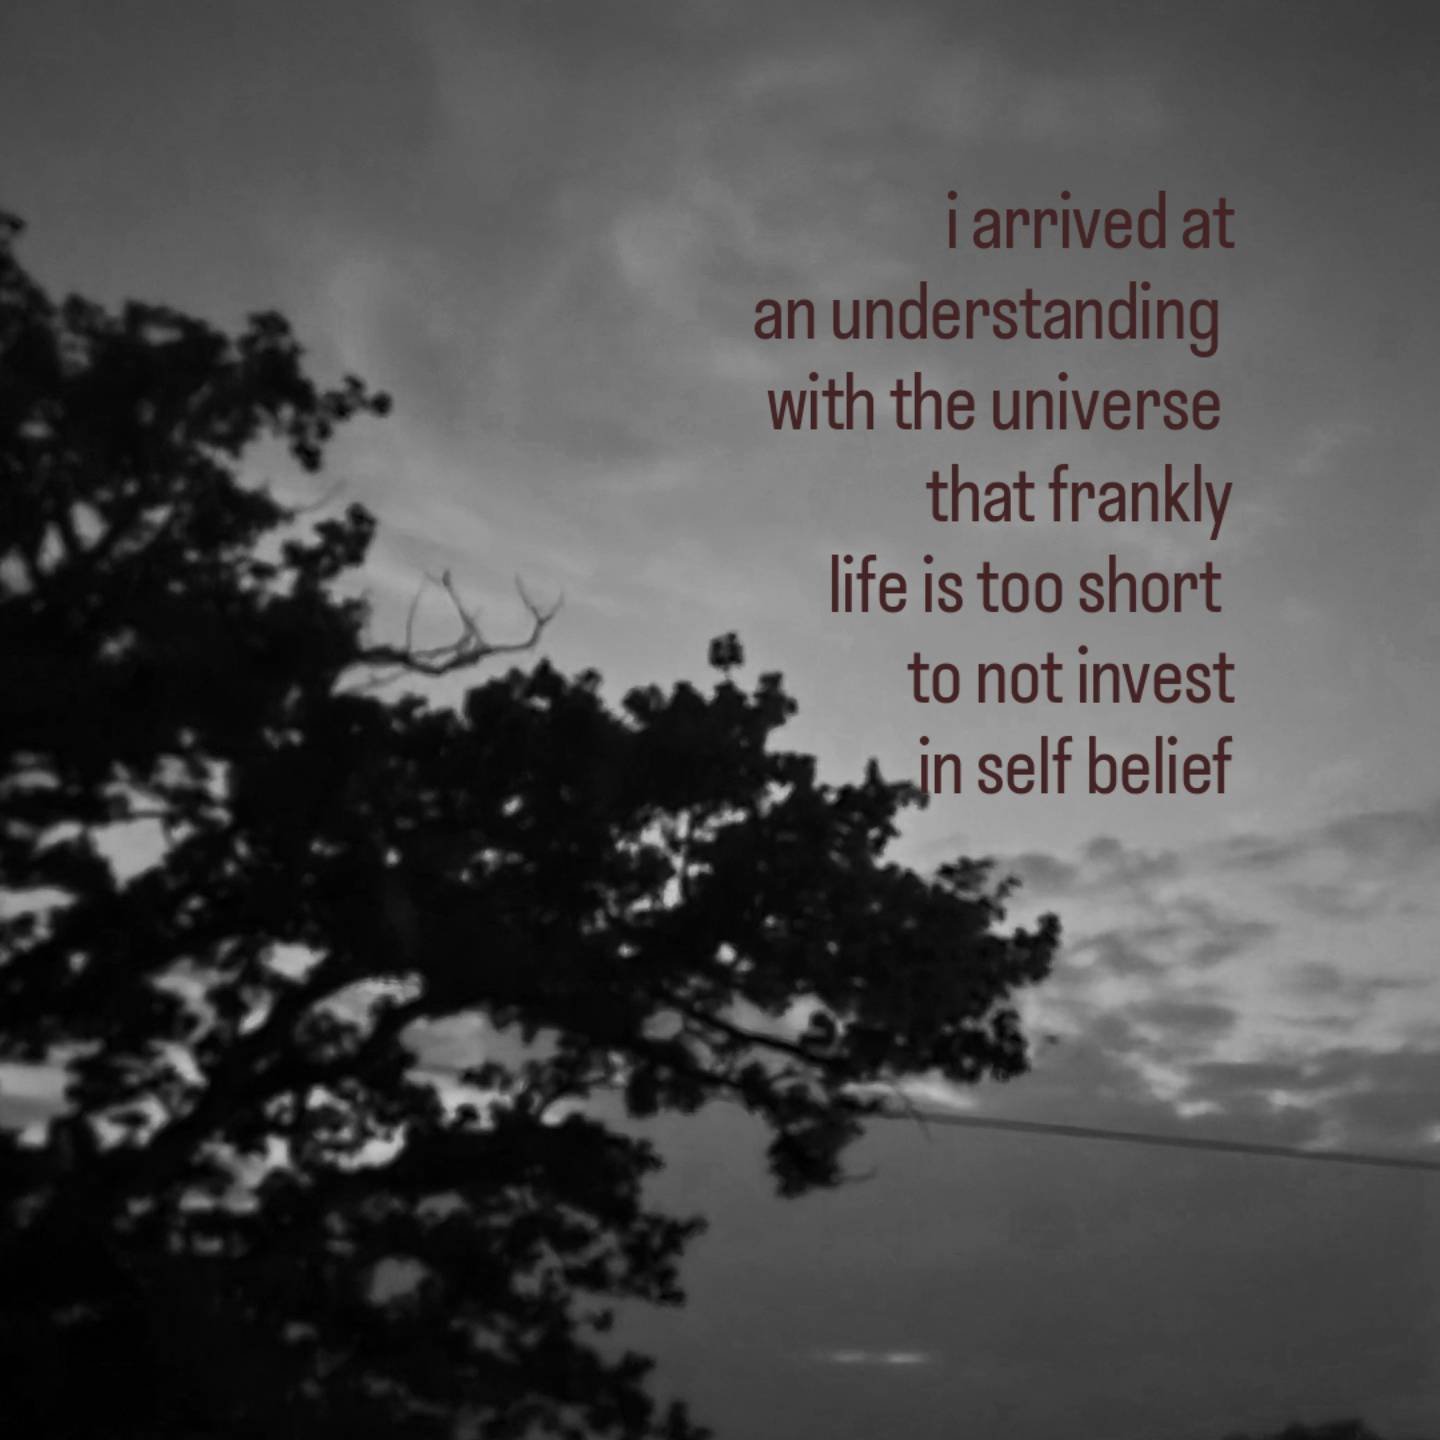 i arrived&nbsp;at 

an understanding&nbsp;

with the universe&nbsp;

that frankly

life&nbsp;

is too short&nbsp;

to not invest

in self belief